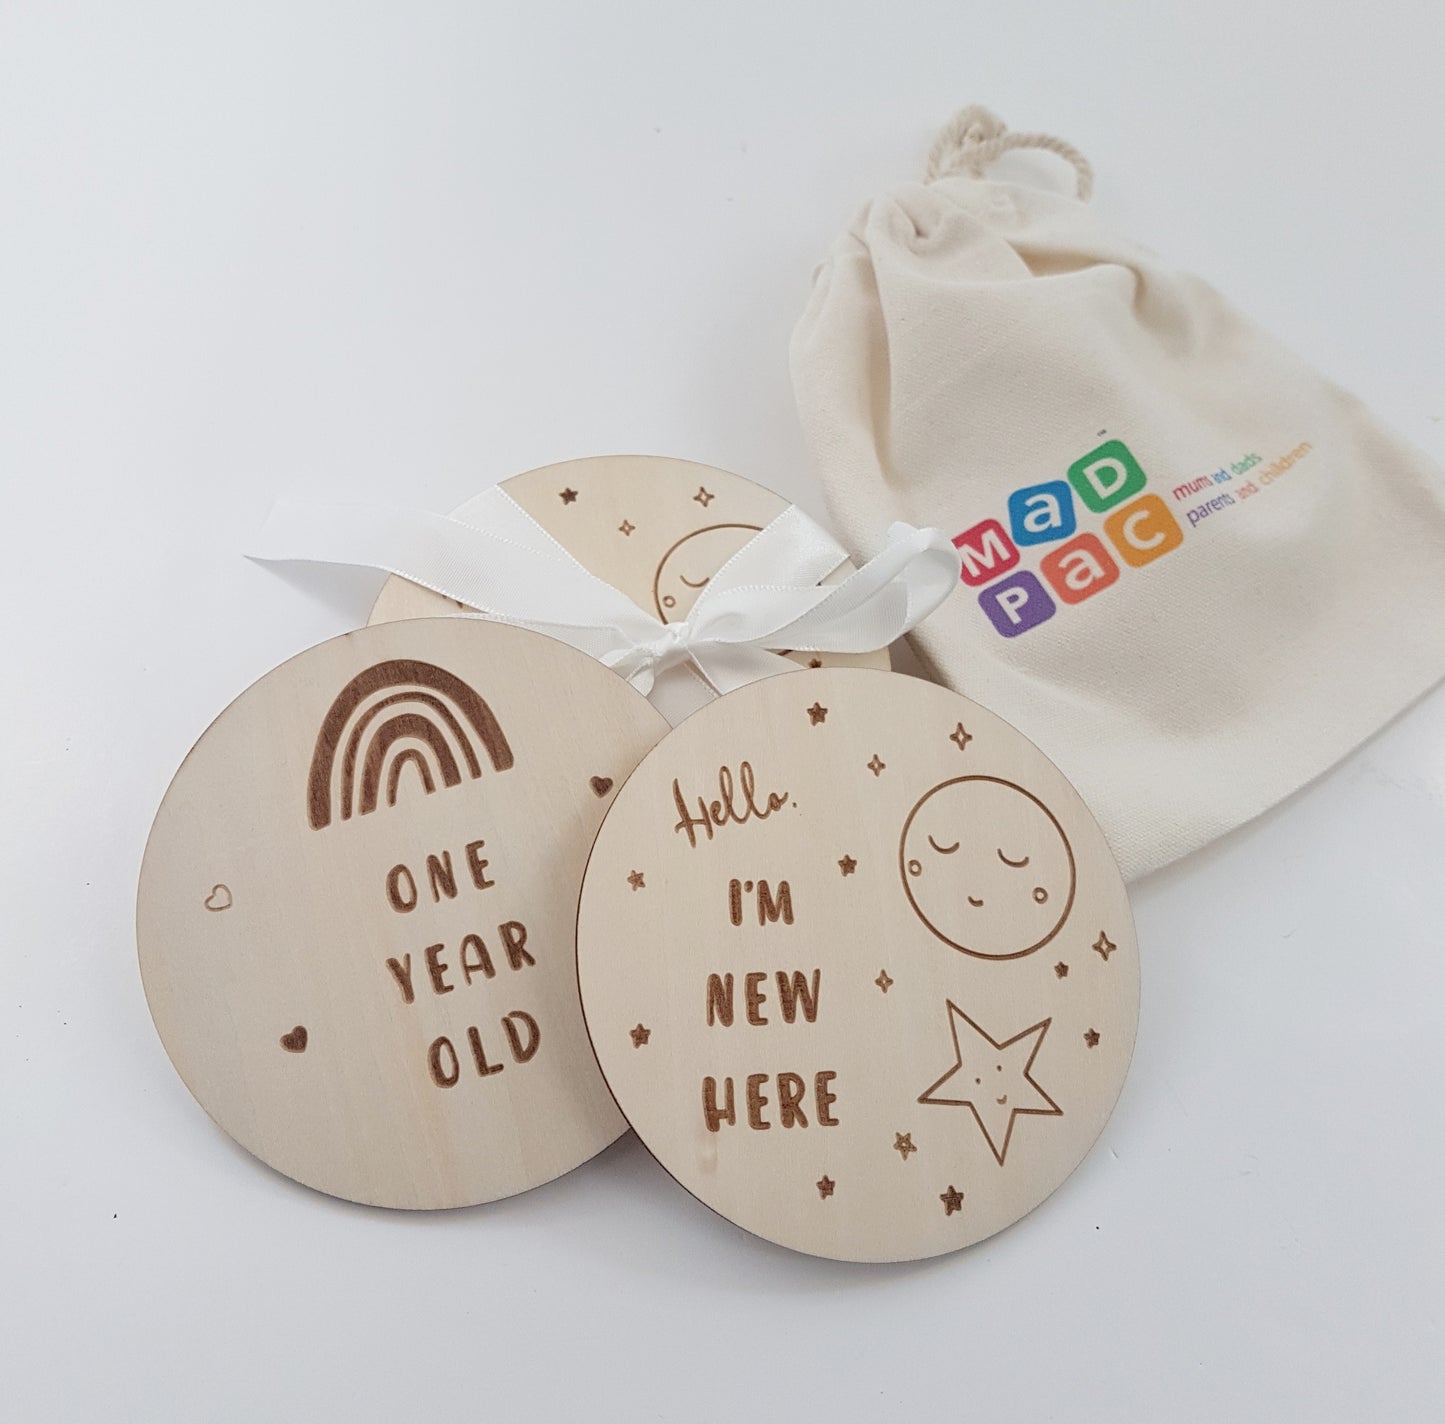 14 Wooden Baby milestone discs (2 designs - Rainbow and Moon) with a little cotton bag. 7 reversible discs